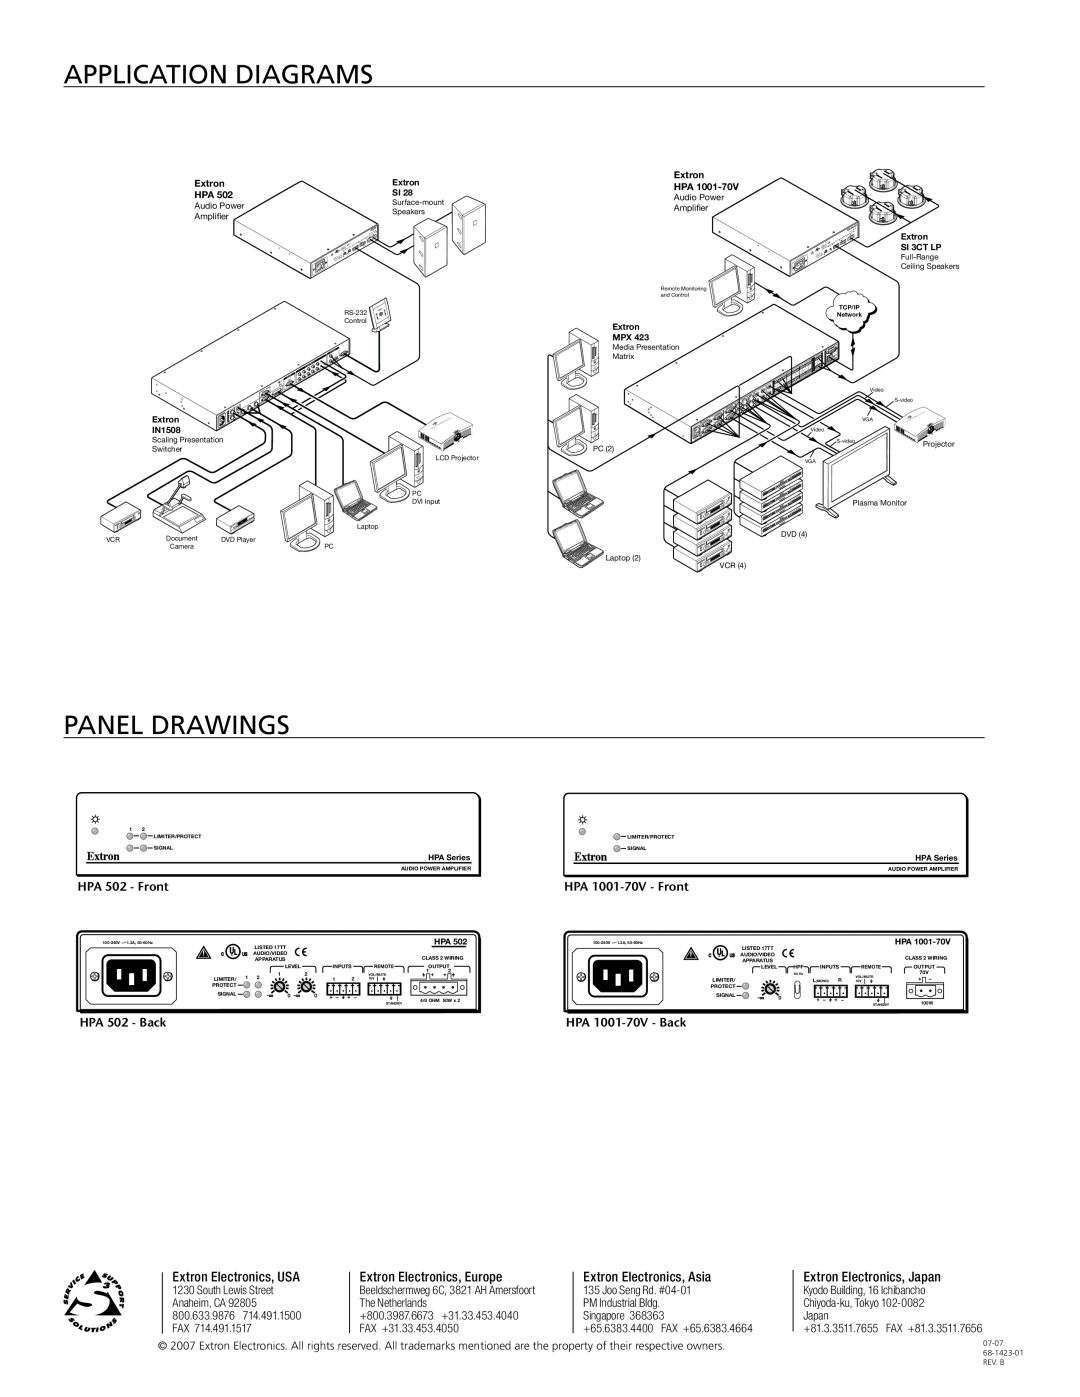 Extron electronic manual Application Diagrams, Panel drawings, HPA 502 - Front, HPA 1001-70V- Front, HPA 502 - Back 